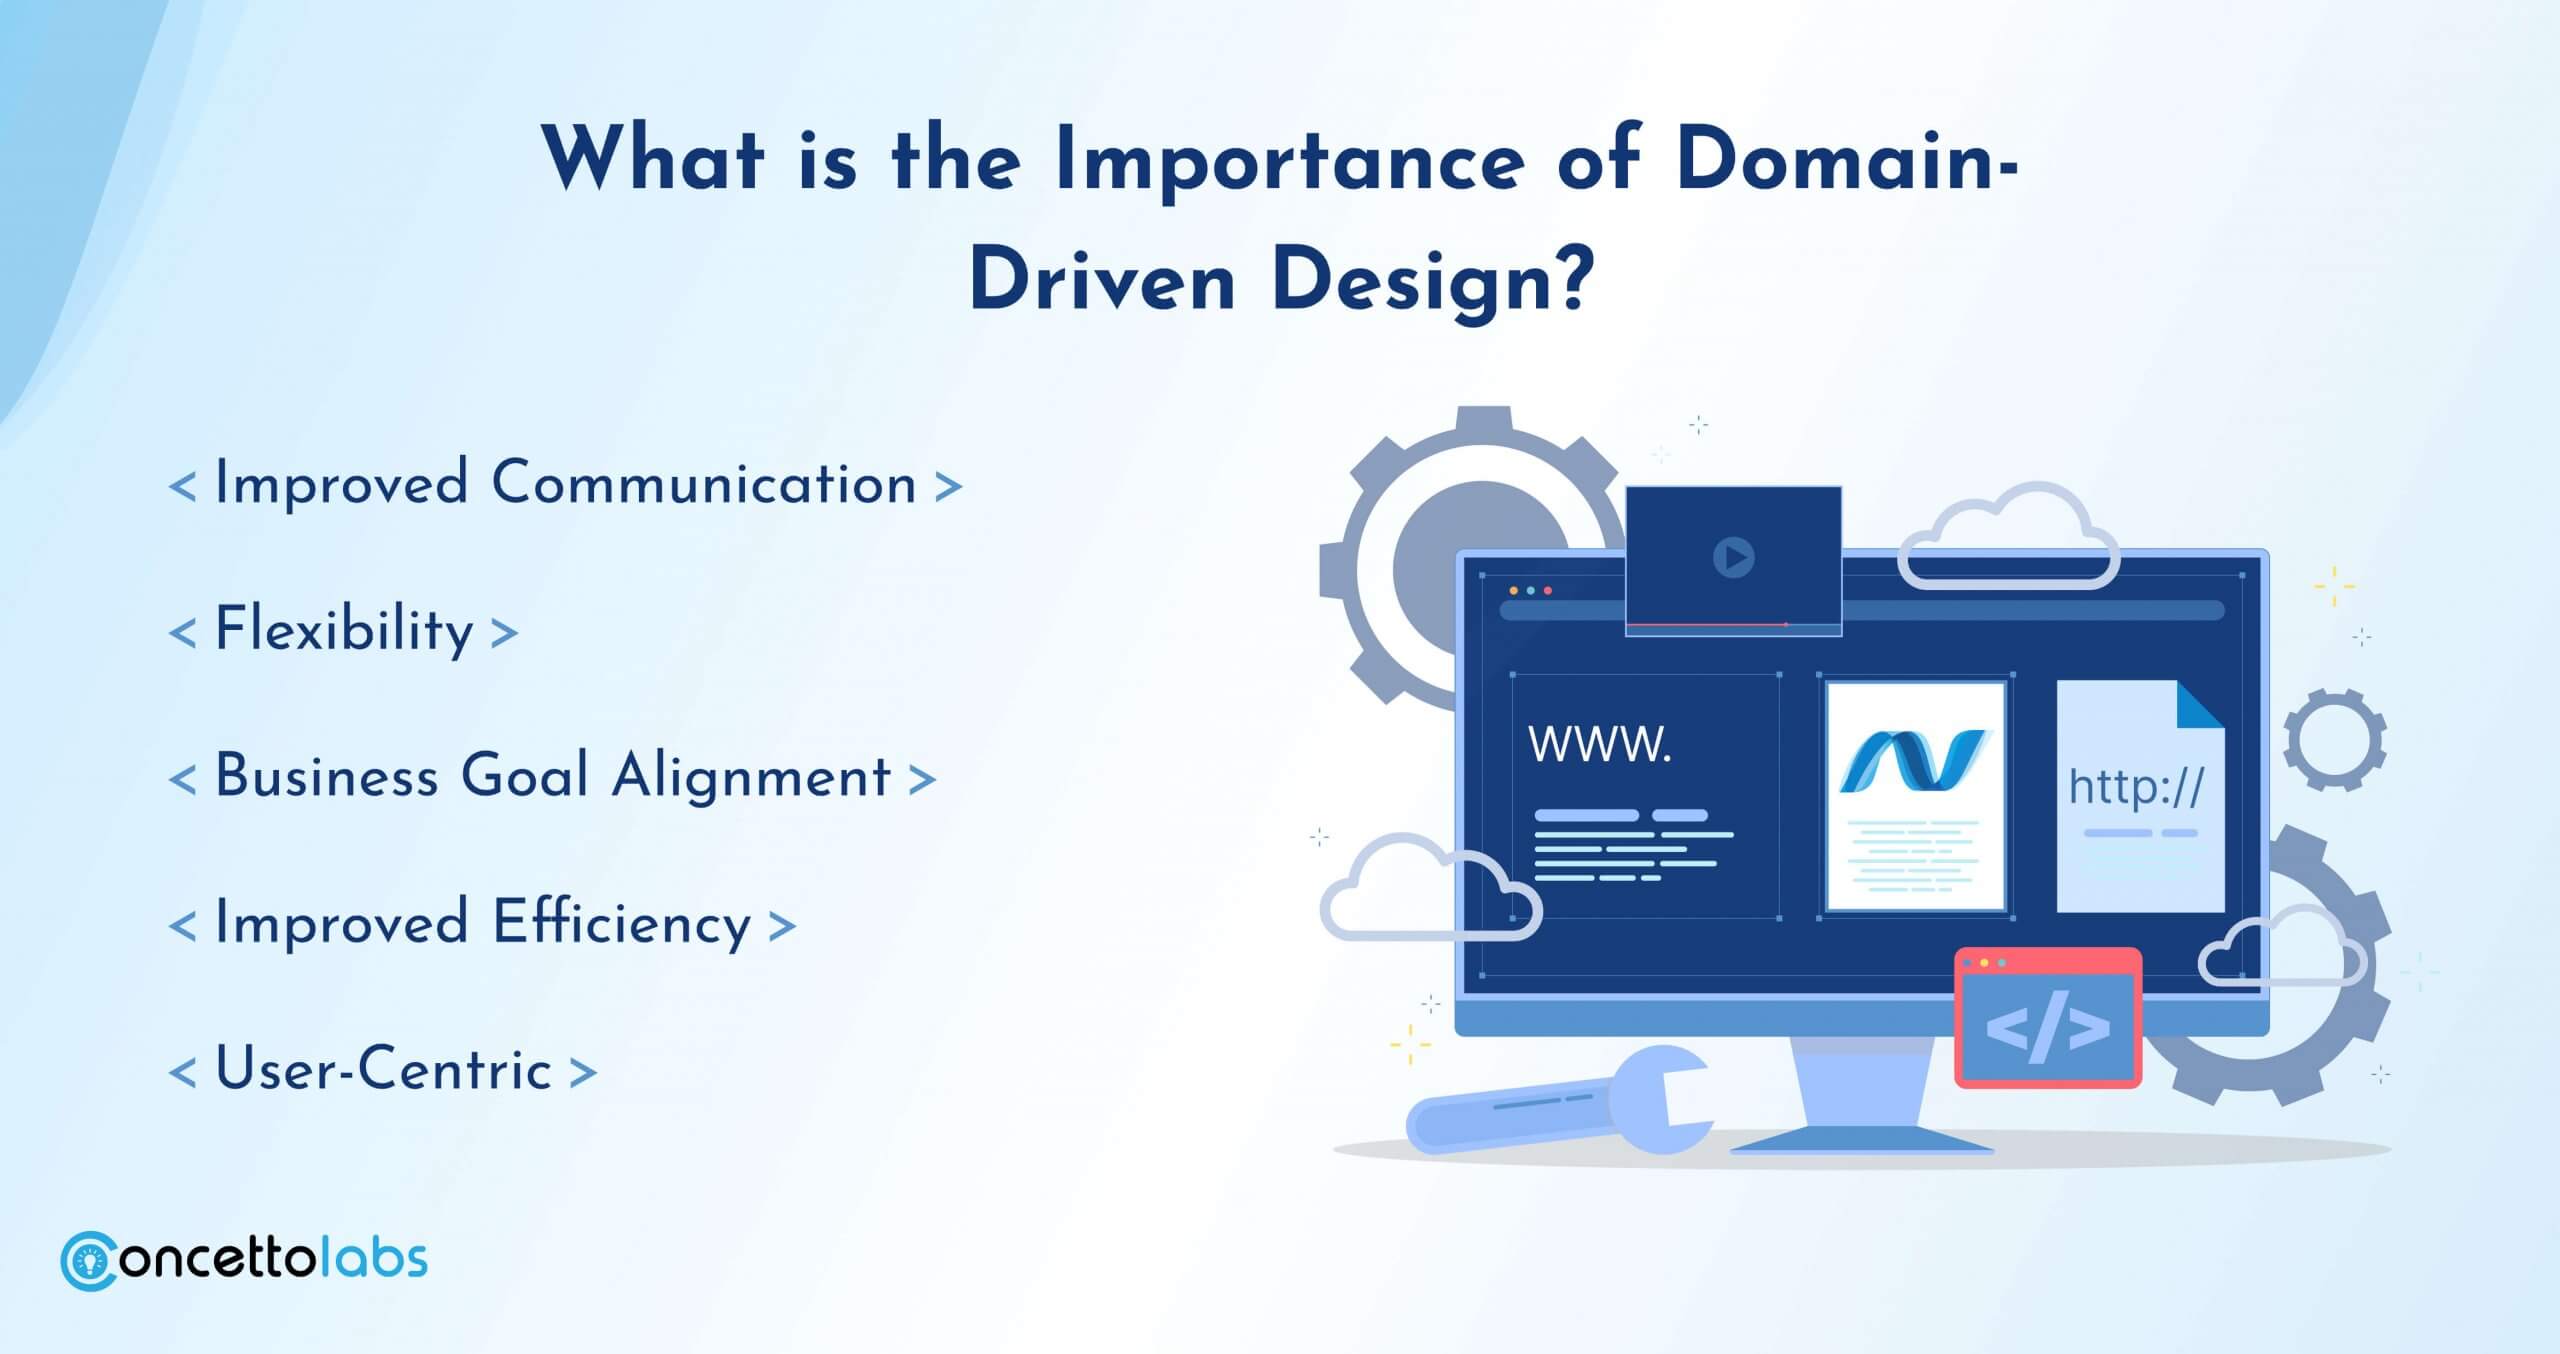 What is the Importance of Domain-Driven Design?